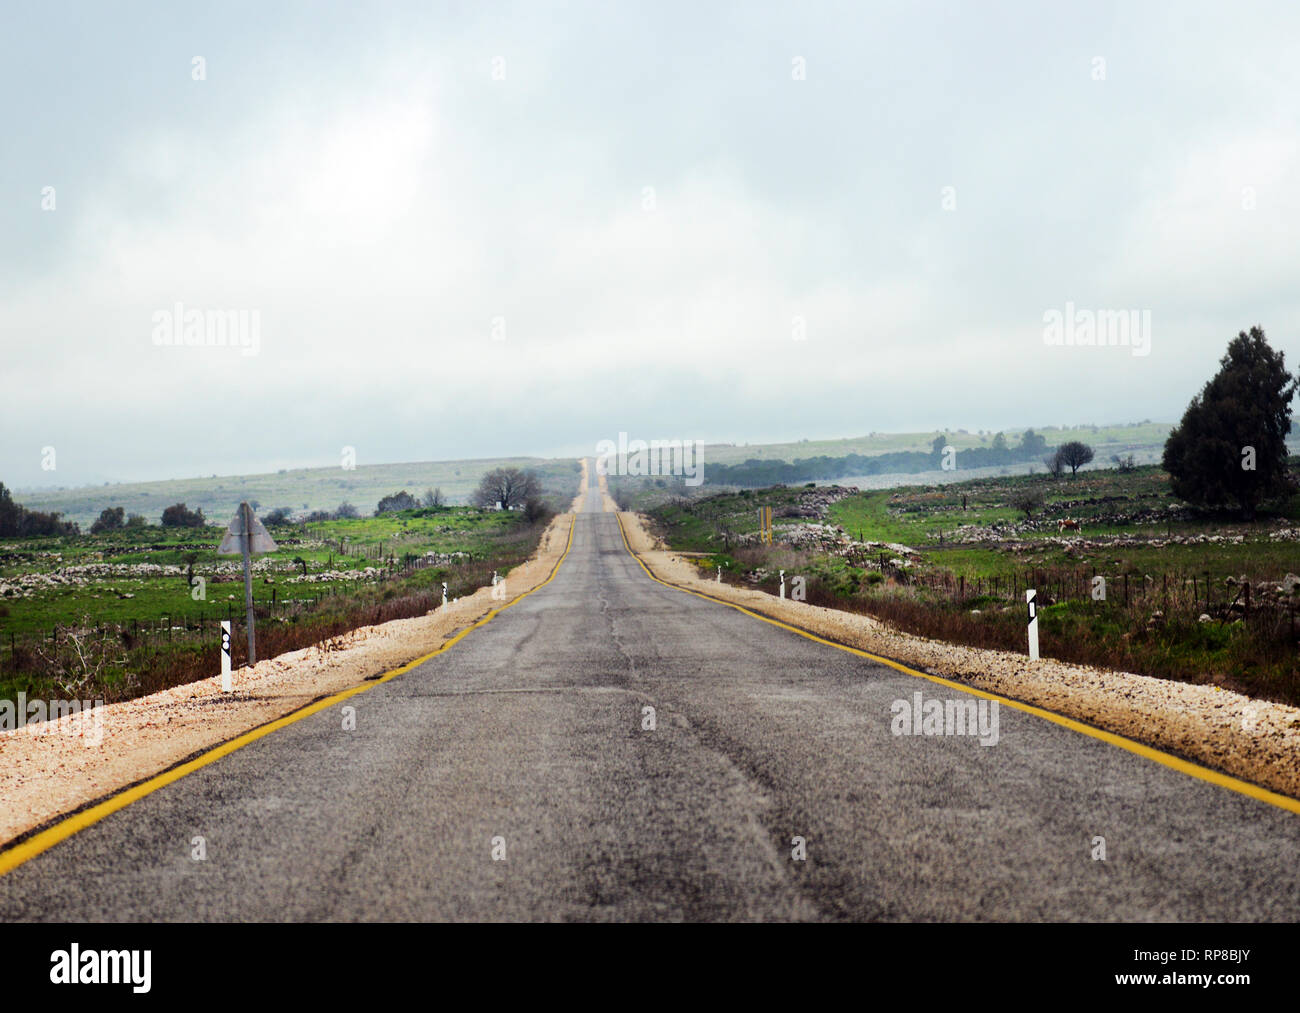 Traveling through the Golan Heights, Stock Photo